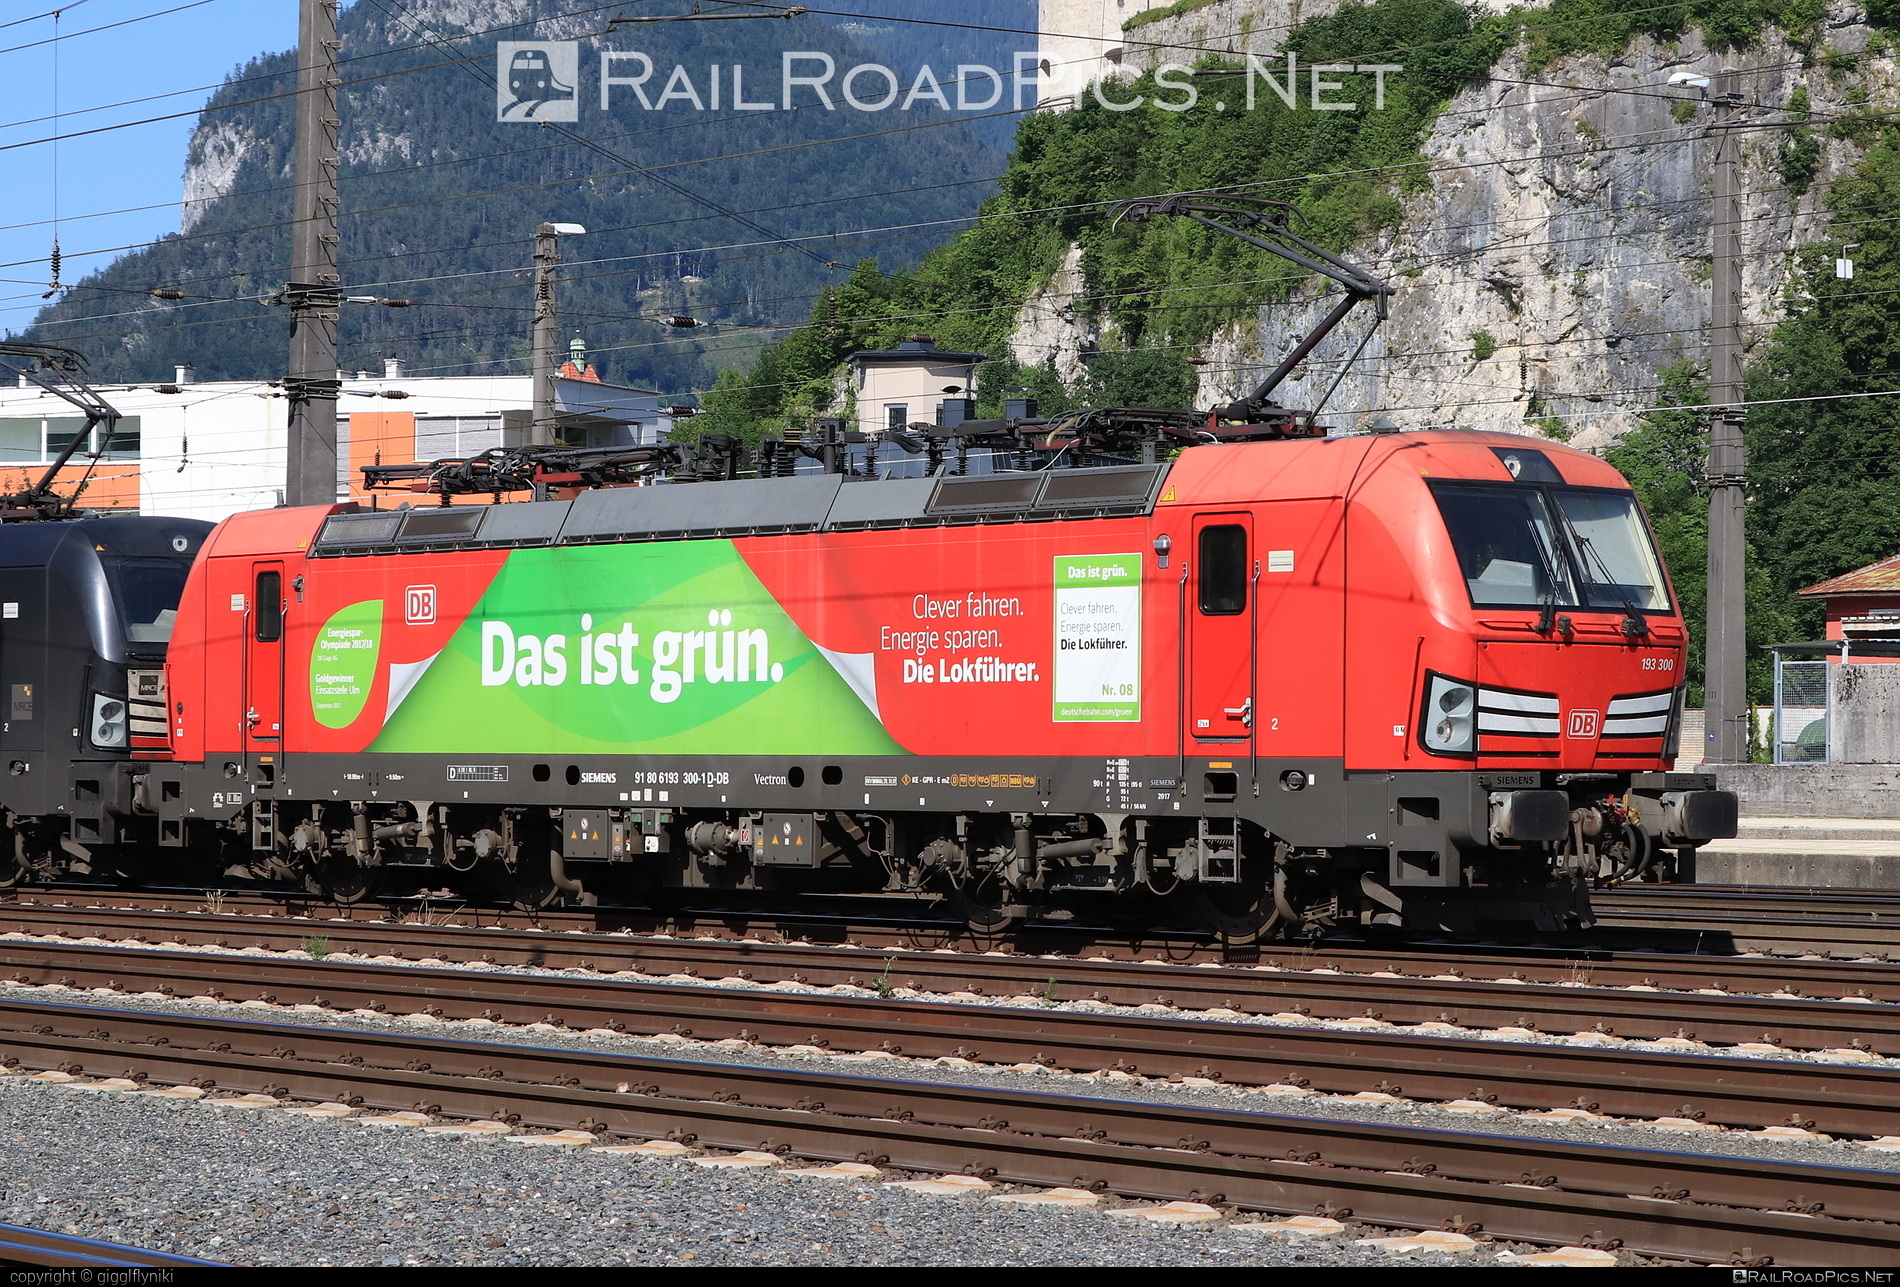 Siemens Vectron MS - 193 300 operated by DB Cargo AG #db #dbcargo #dbcargoag #deutschebahn #siemens #siemensVectron #siemensVectronMS #vectron #vectronMS